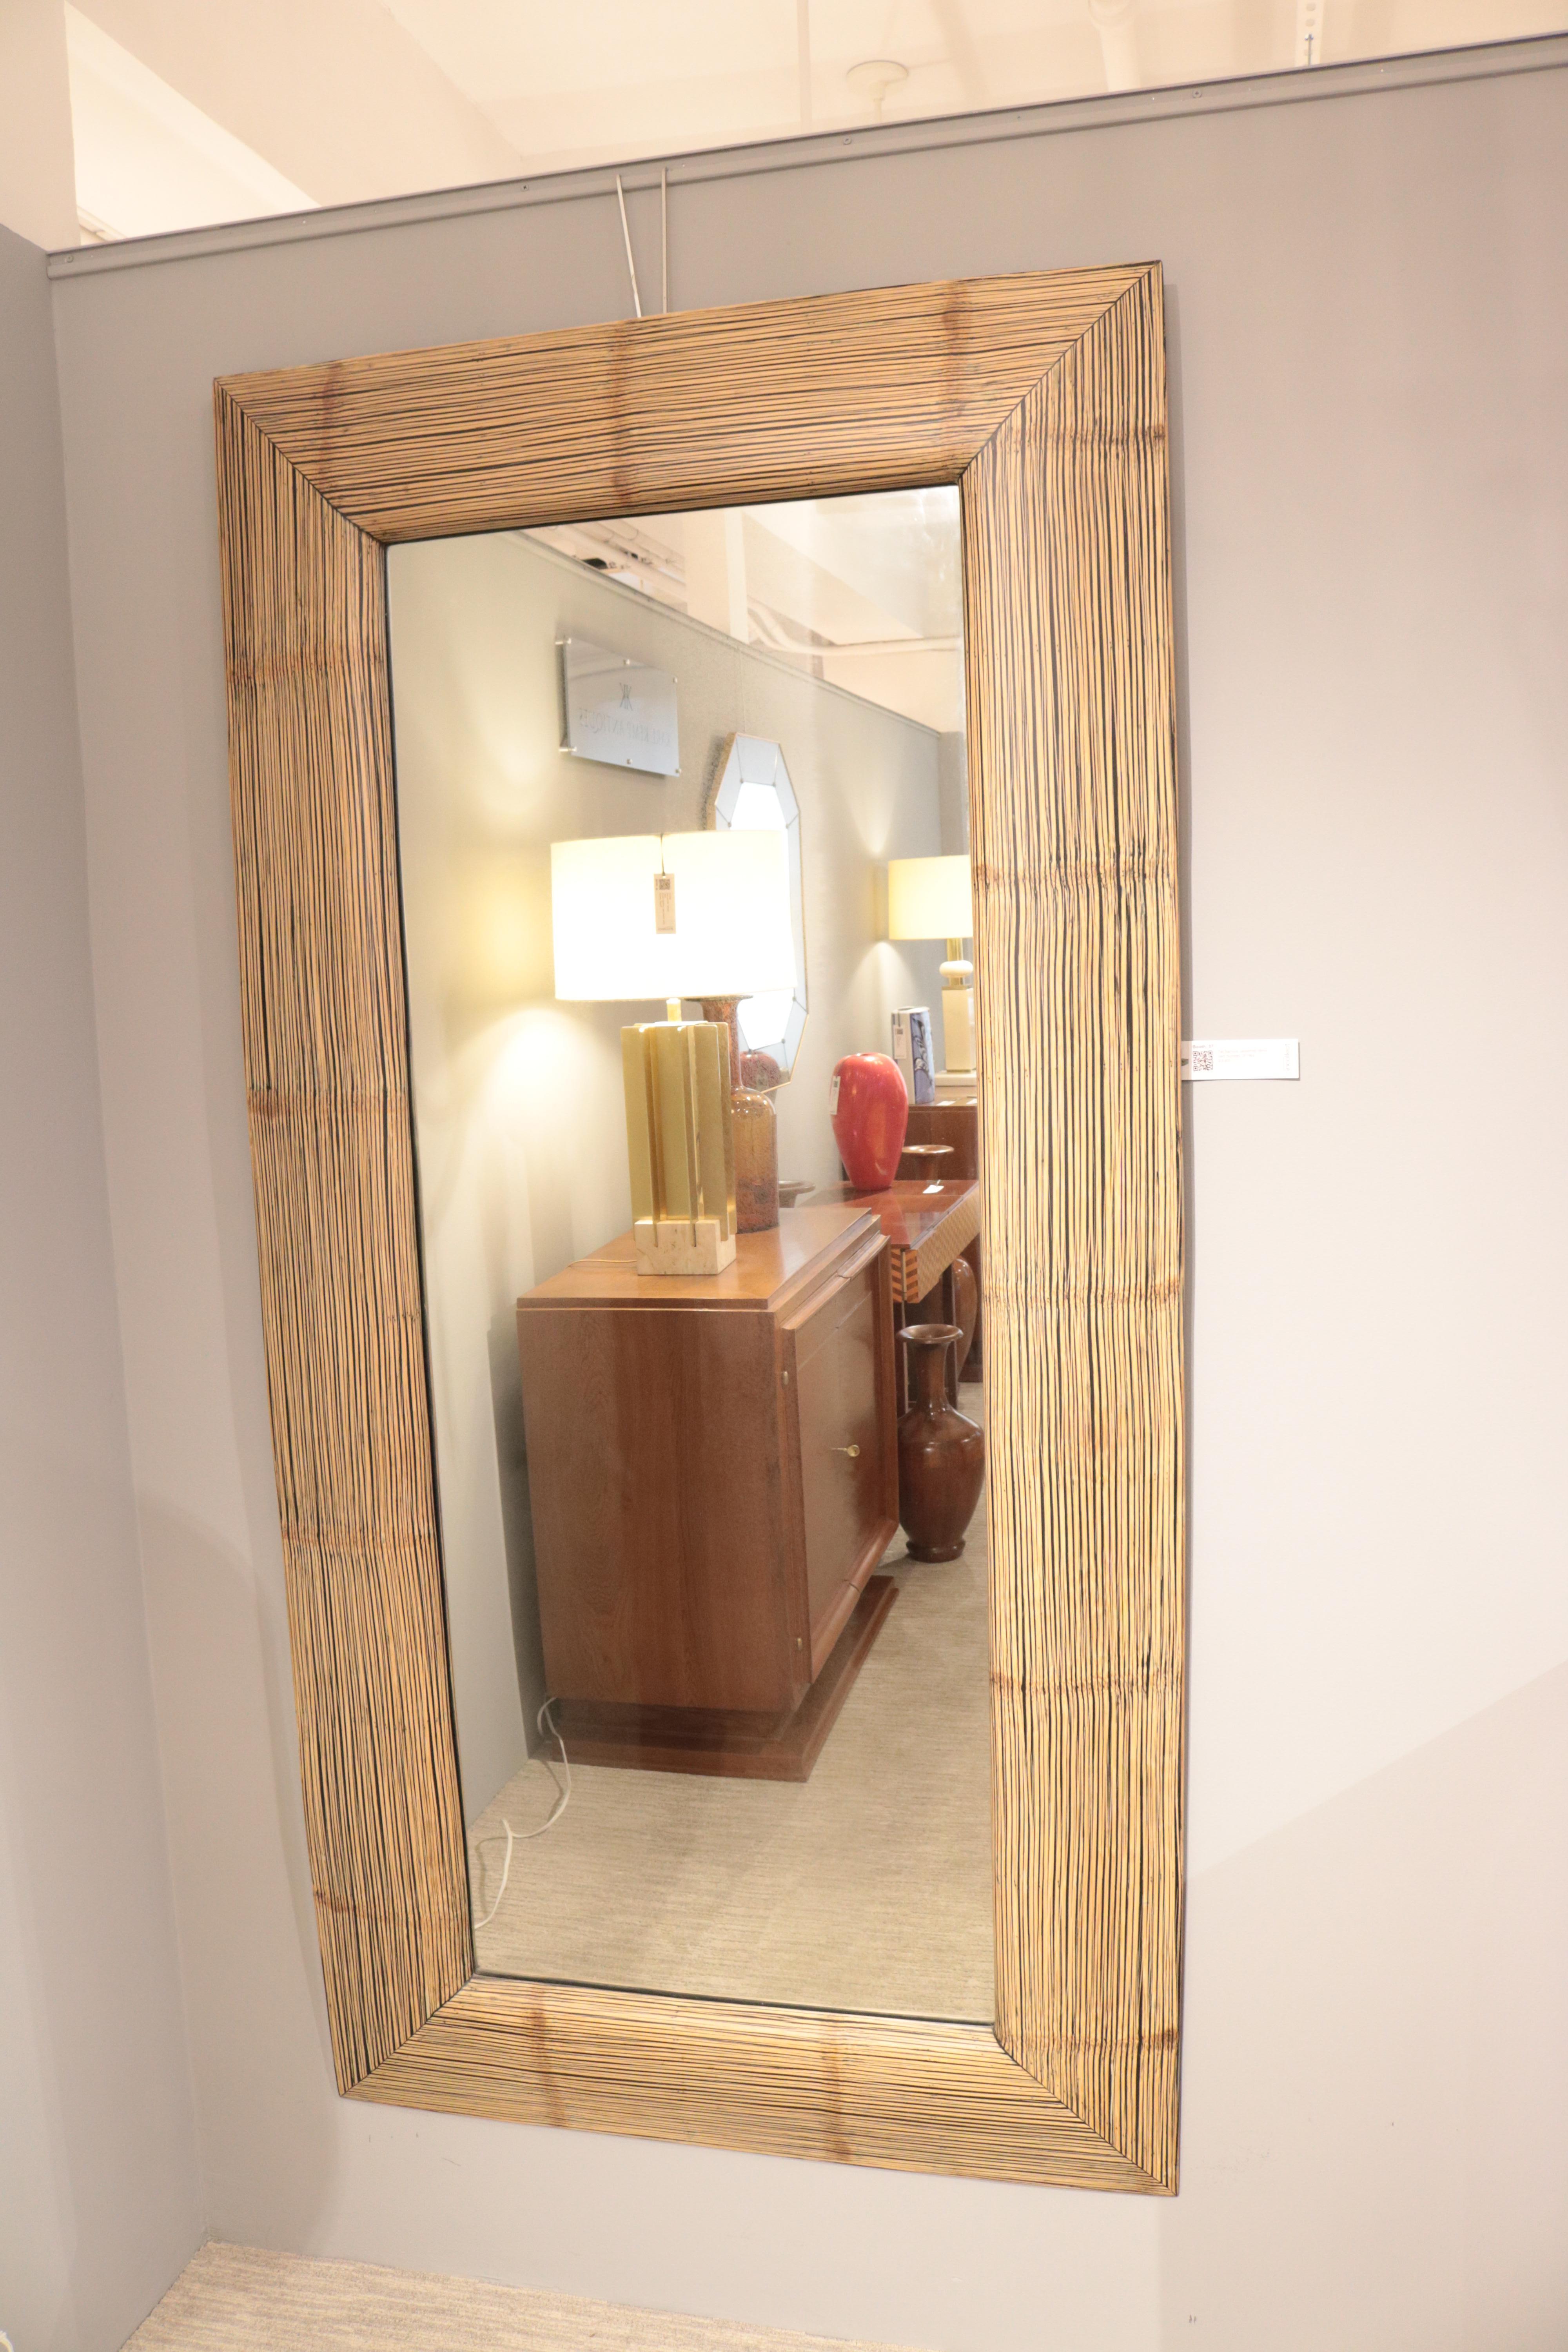 A tall modernist oversized wall mirror.
Faux bamboo.